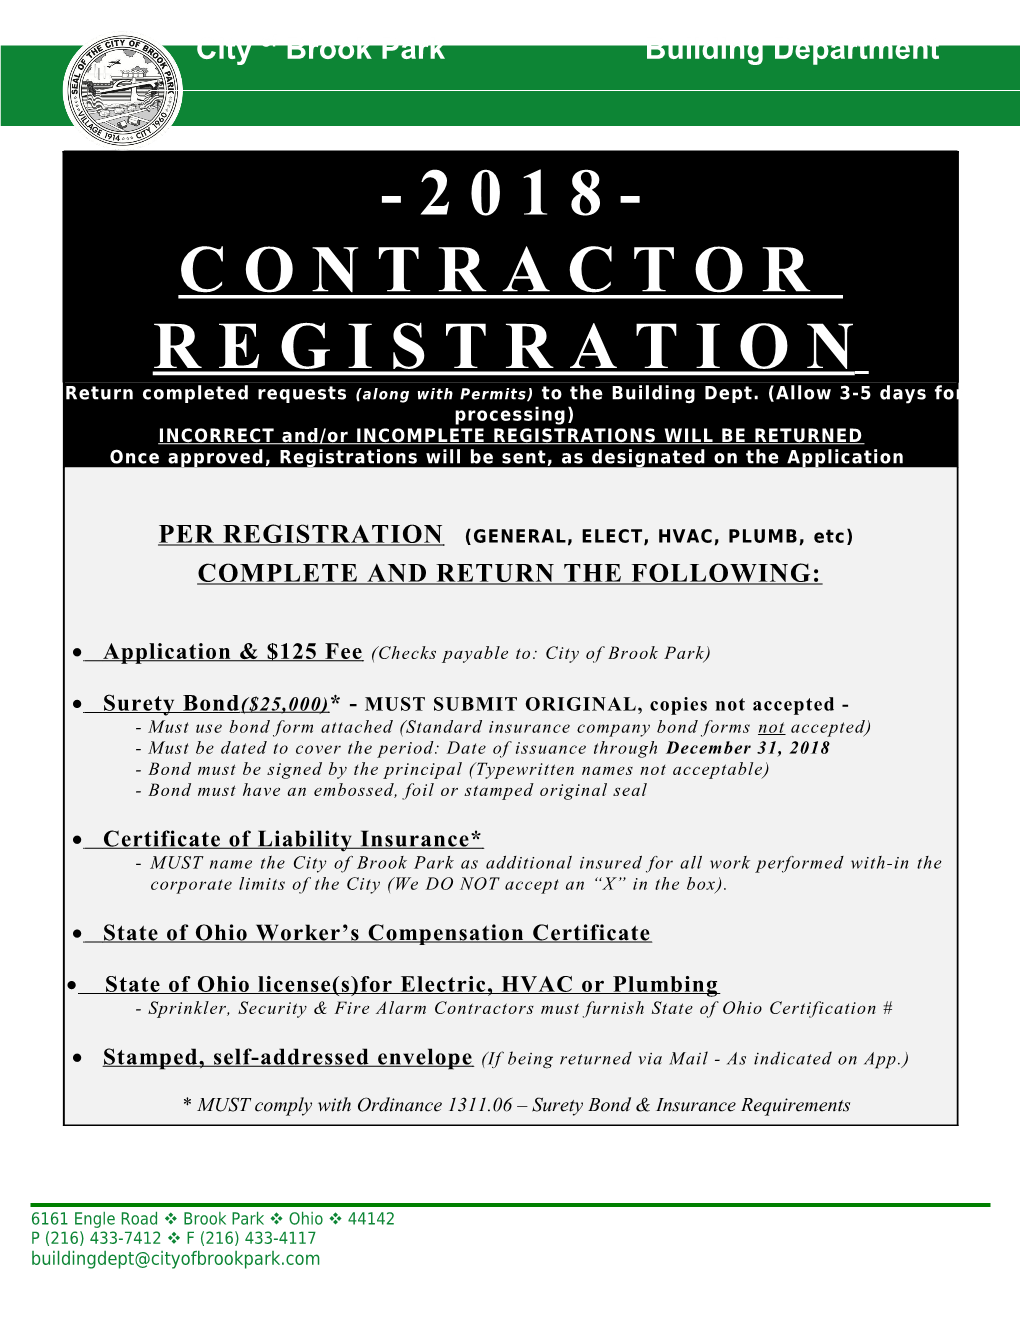 * for Remodeling, Alteration and New Construction Projects, the Owner/Contractor Must Submit